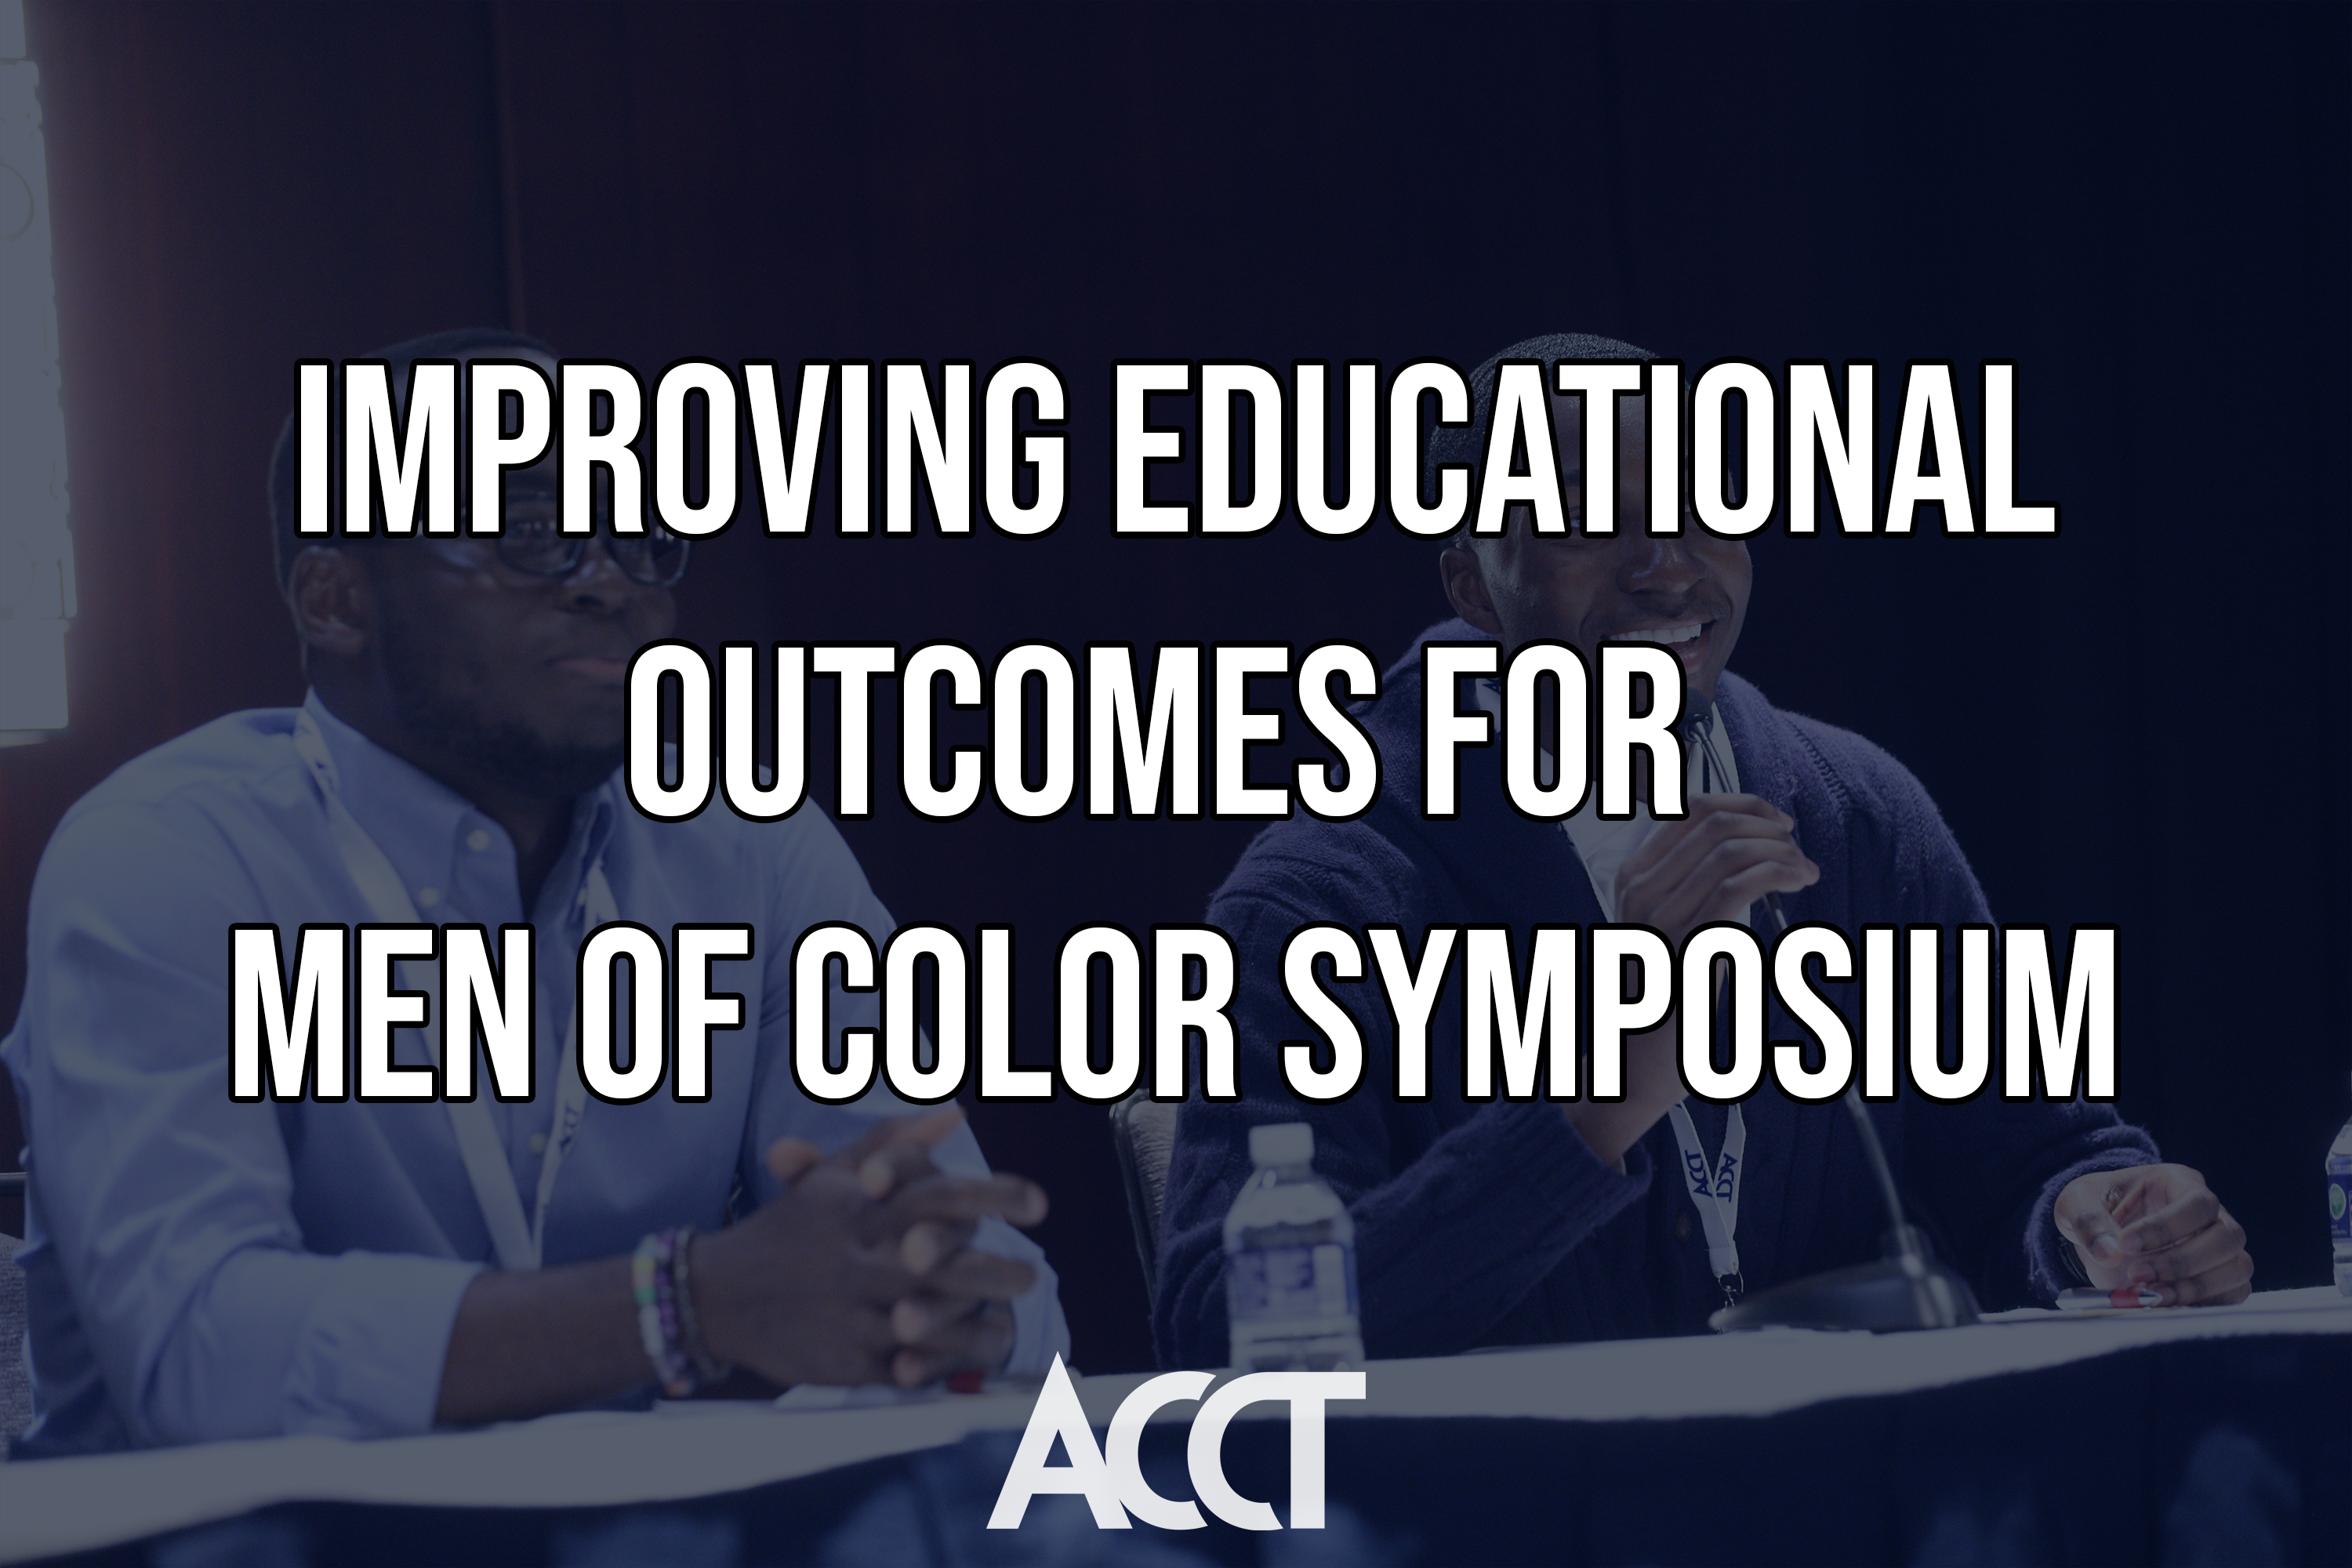 Improving Education Outcomes for Men of Color